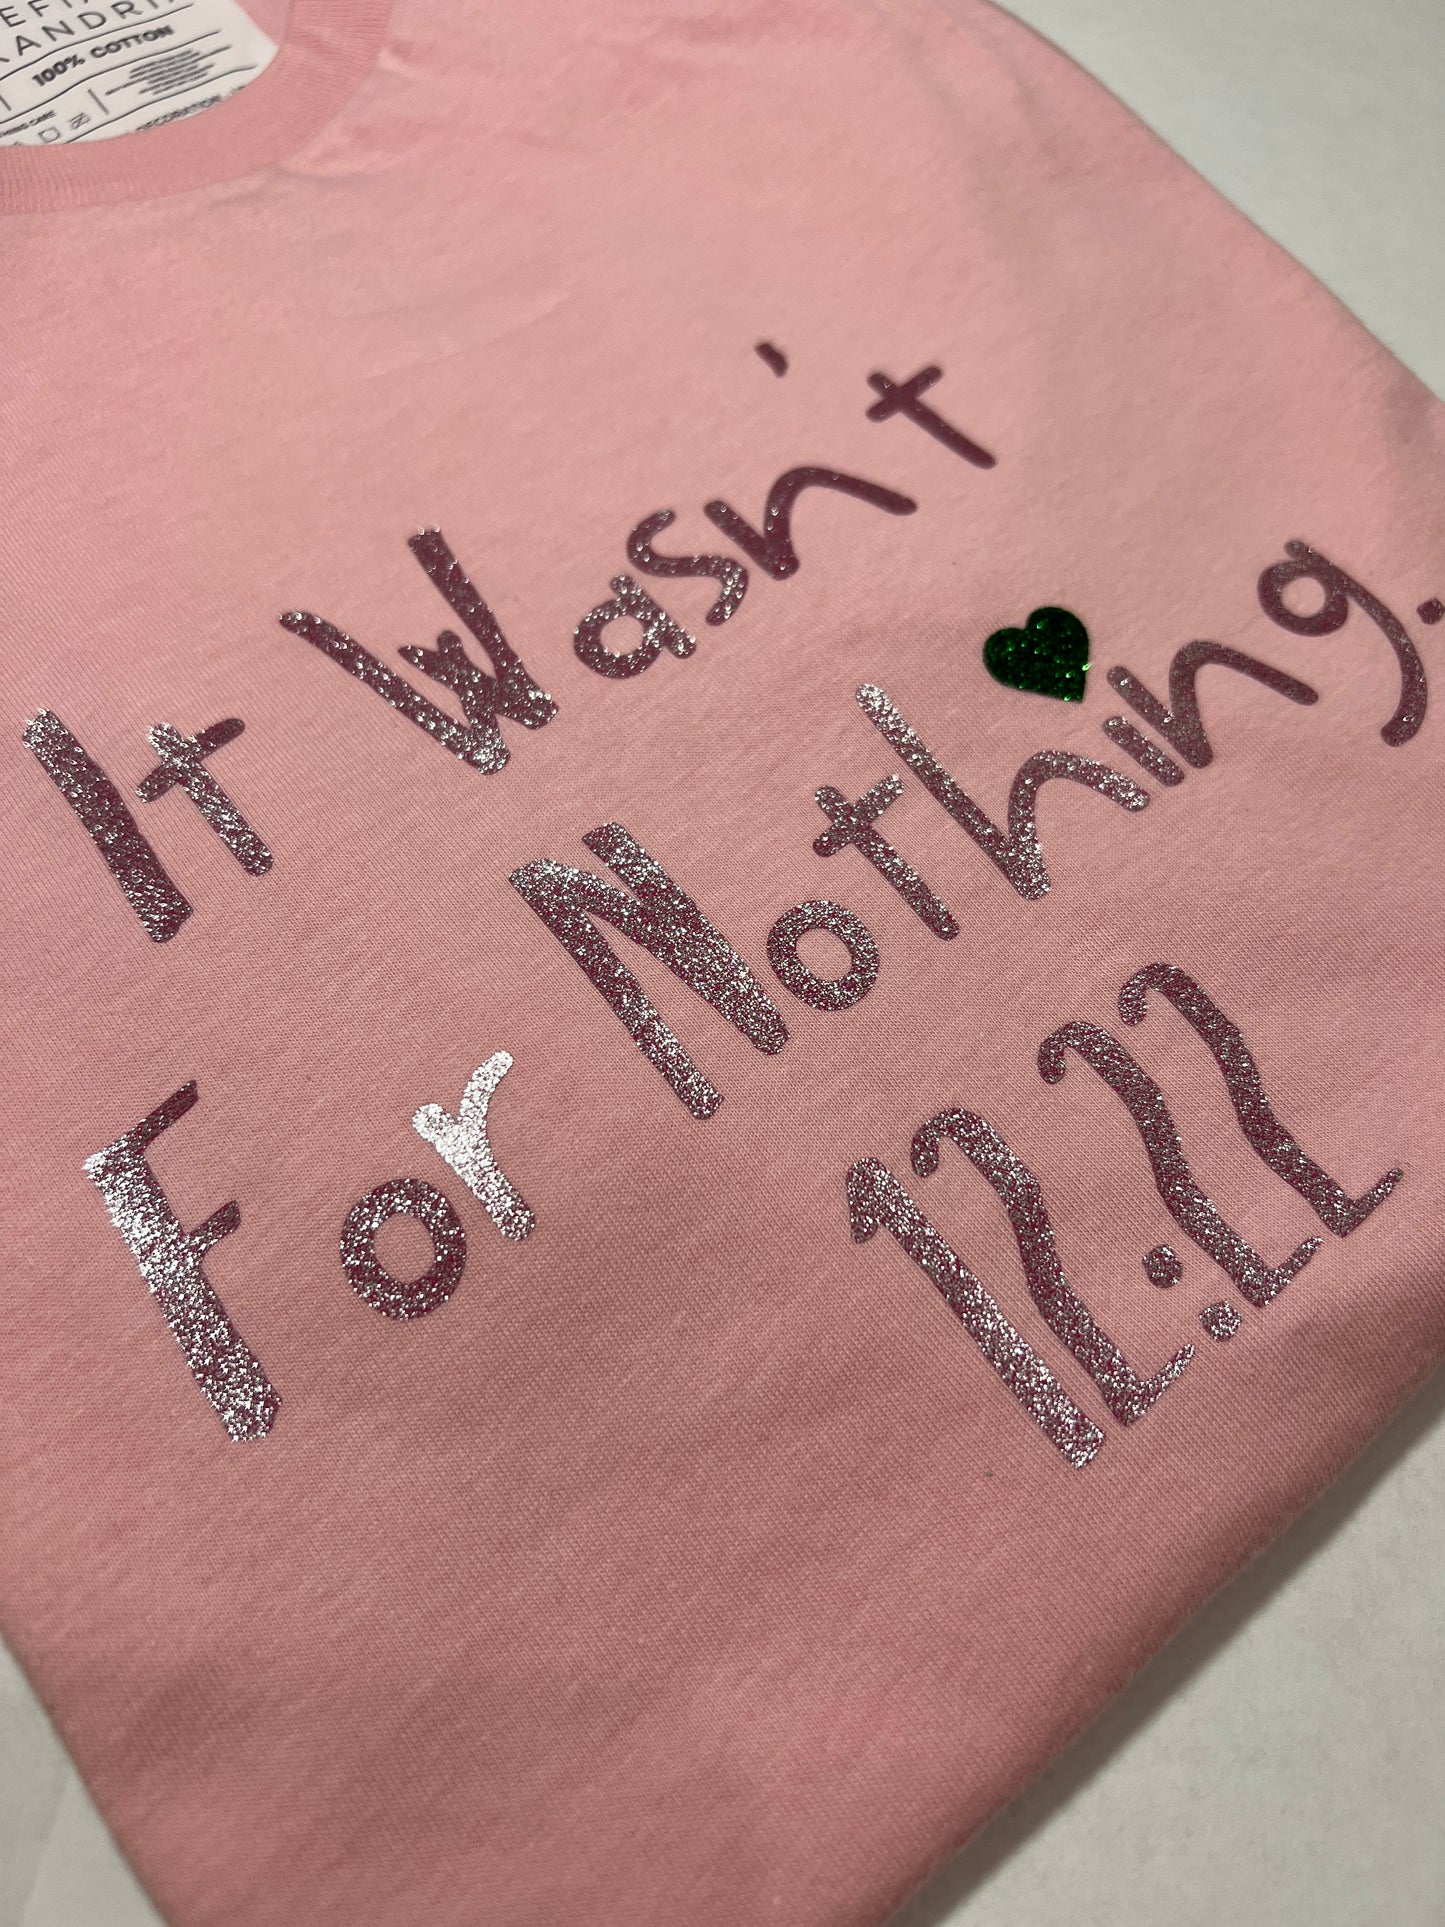 It wasn't for nothing 12:22 T-Shirt Glitter